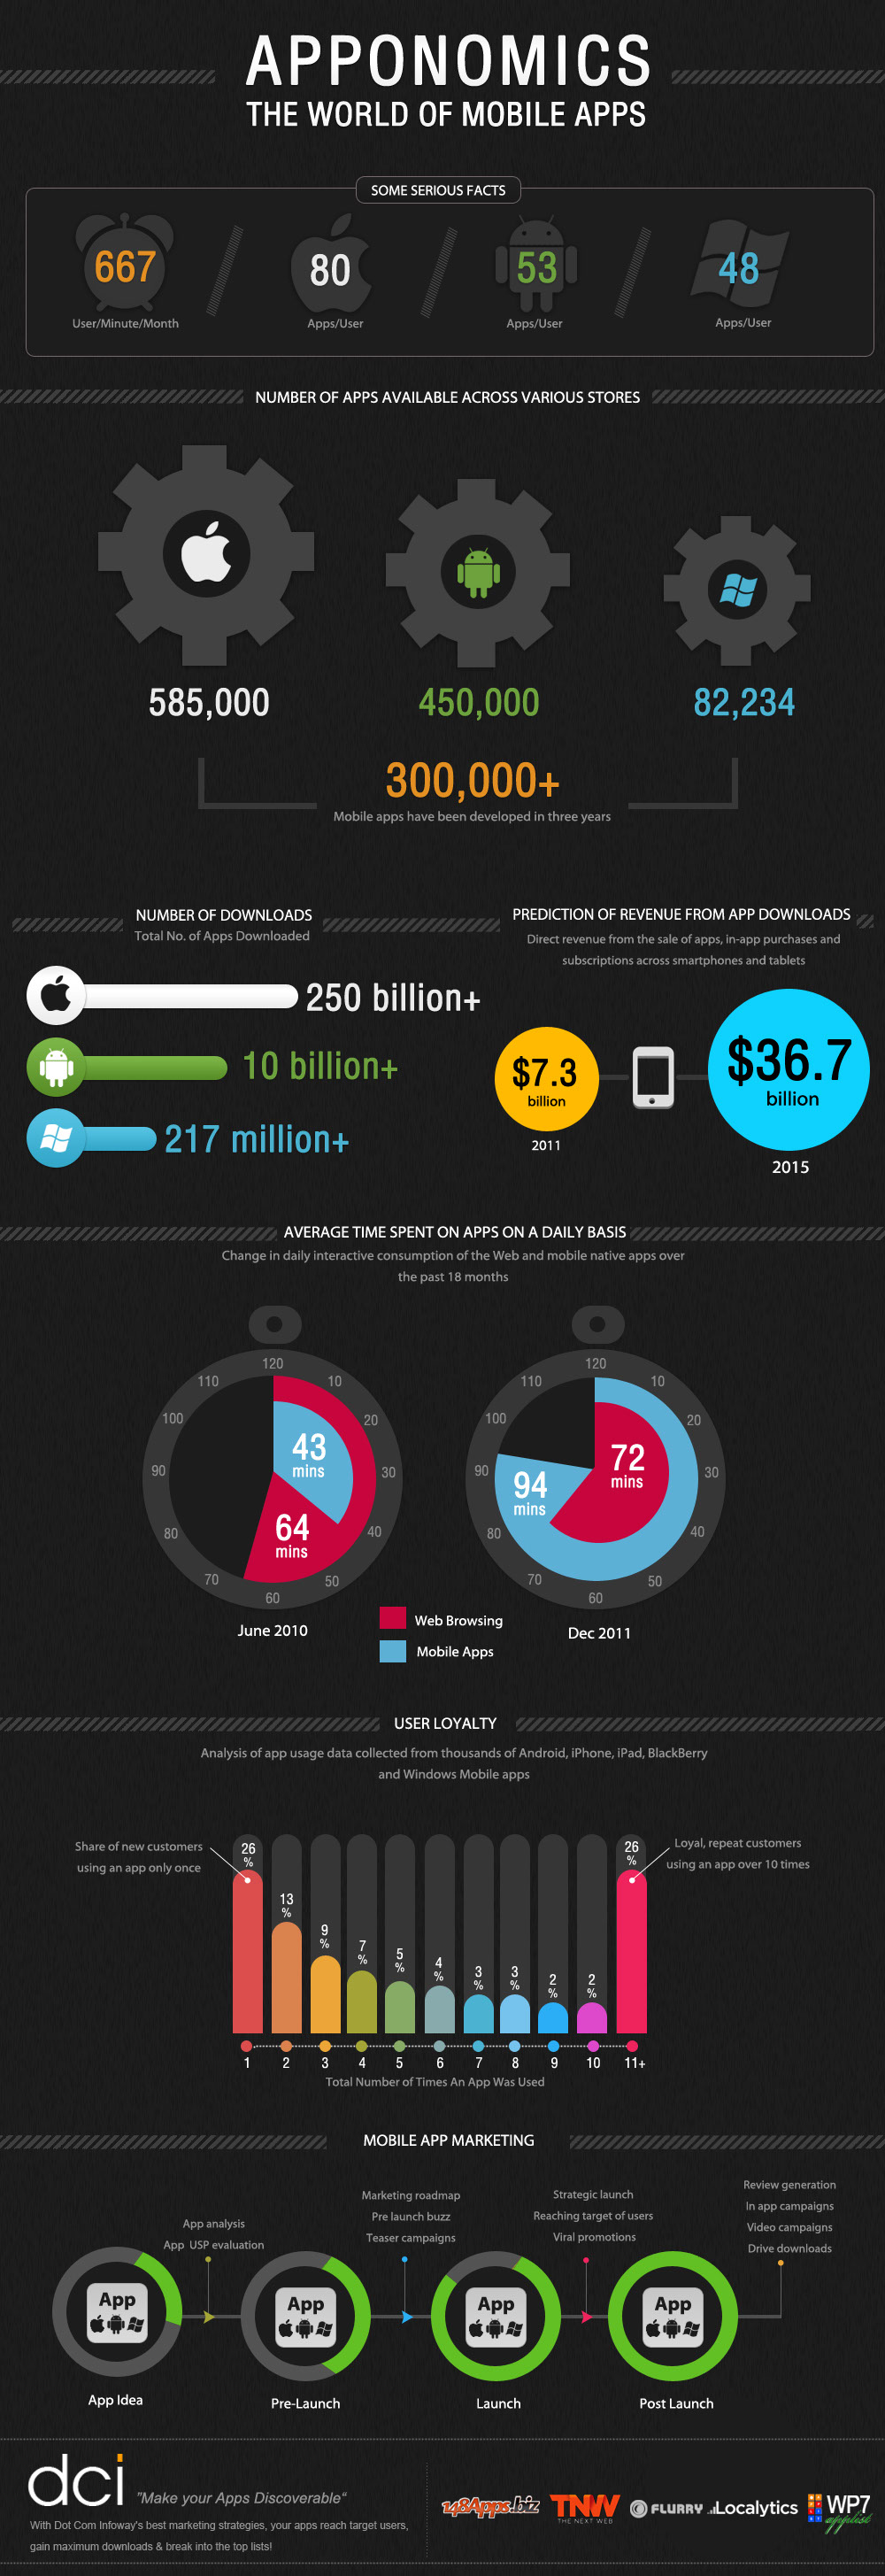 The-World-Of-Mobile-Apps-infographic